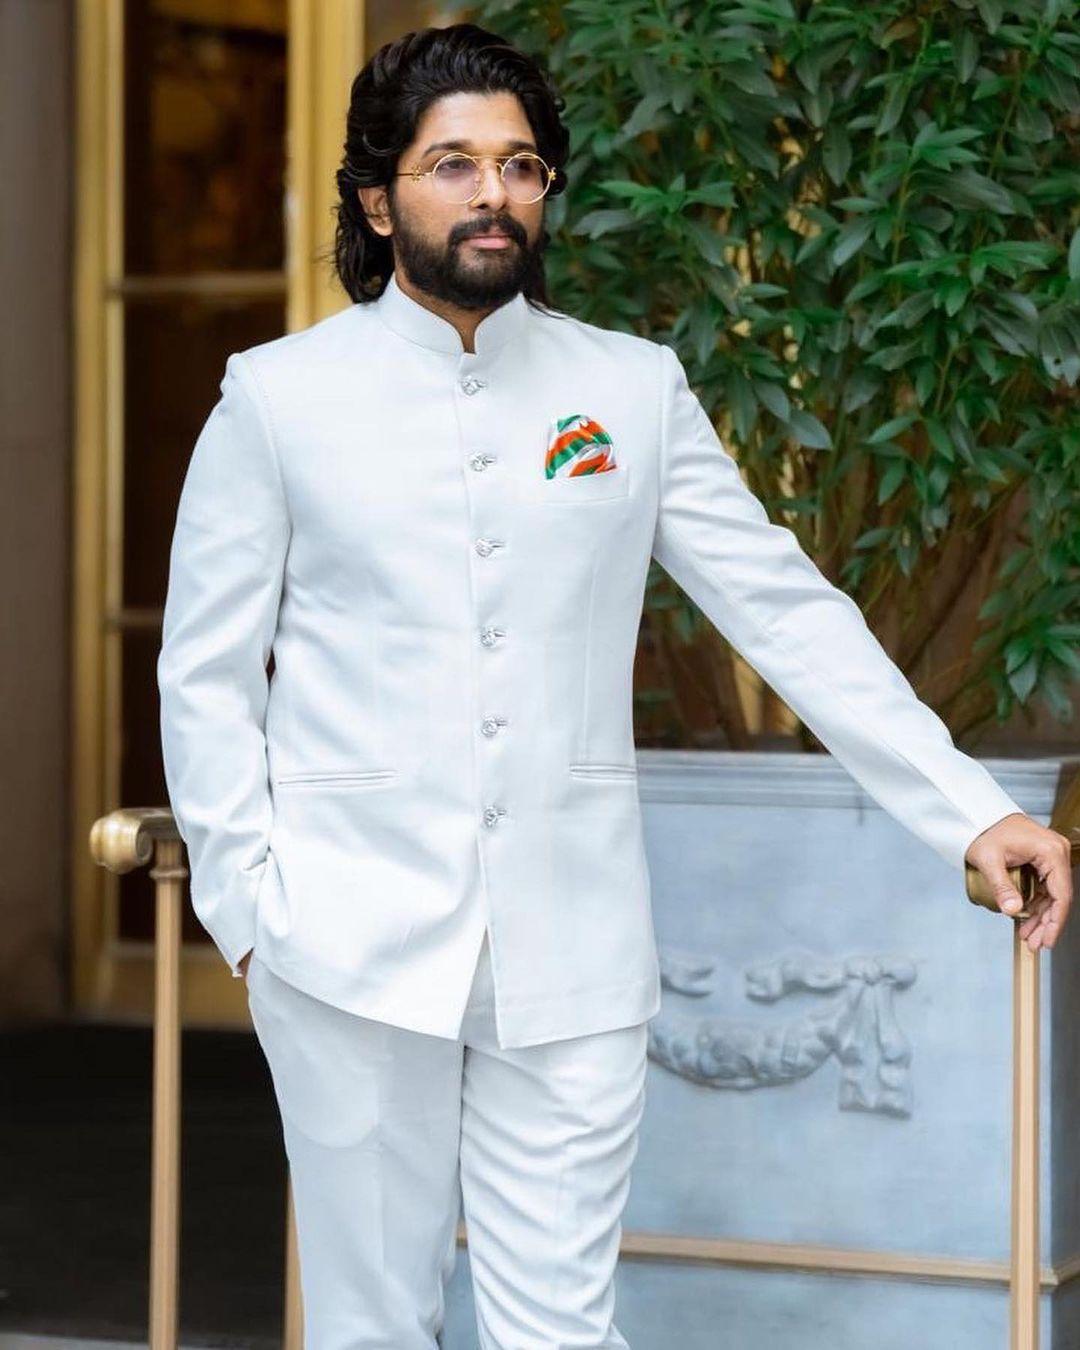 Are you saying Allu Arjun in this white band gala is not making you blush? We caught you! Allu Arjun's look is definitely melting hearts. The actor in this all-white outfit is enough to chase away our Monday blues